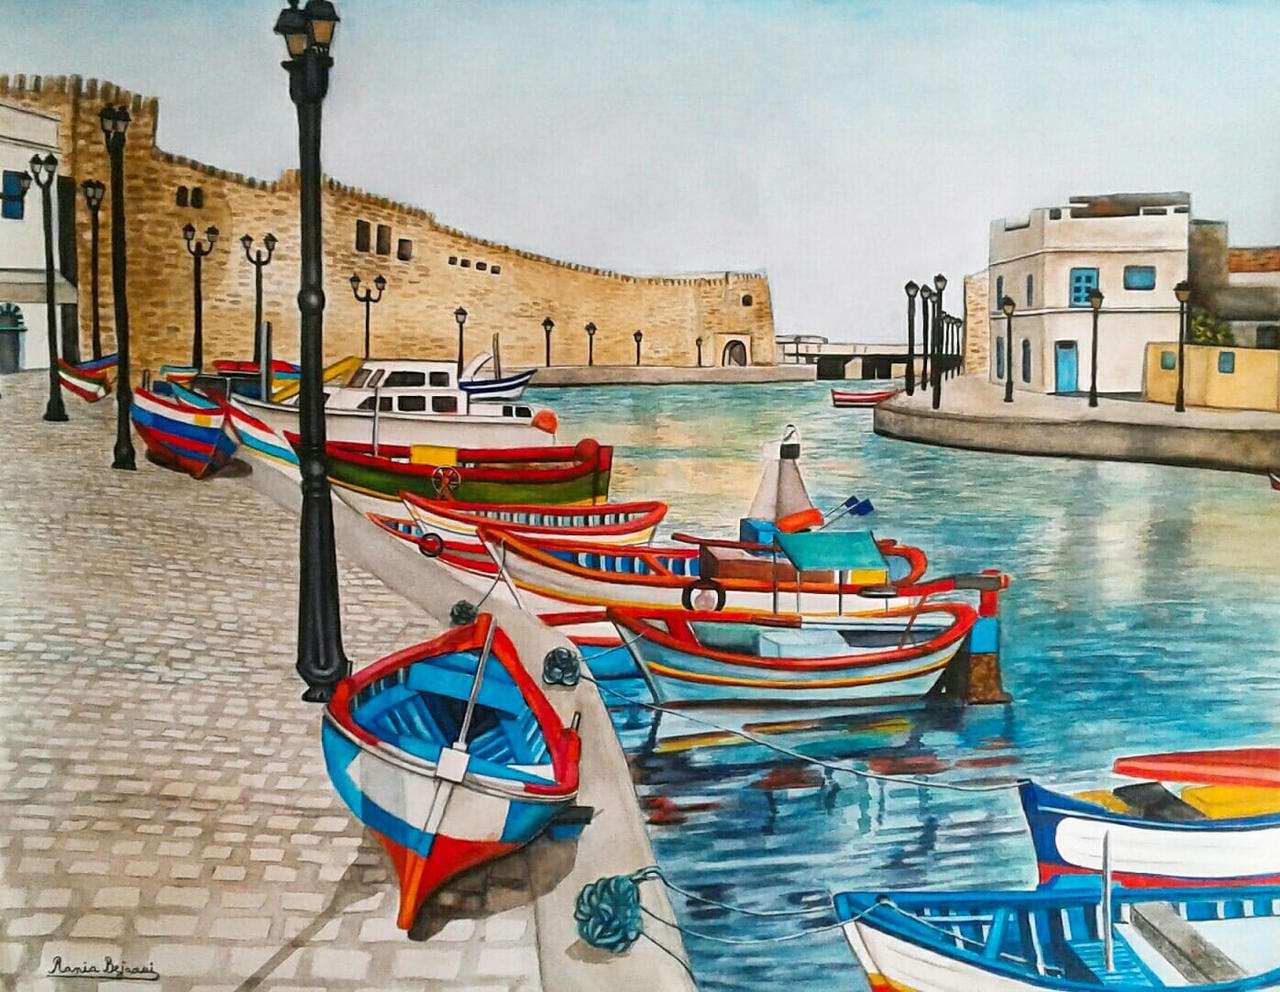 Bizerte in Tunisia Africa paintings jigsaw puzzle online